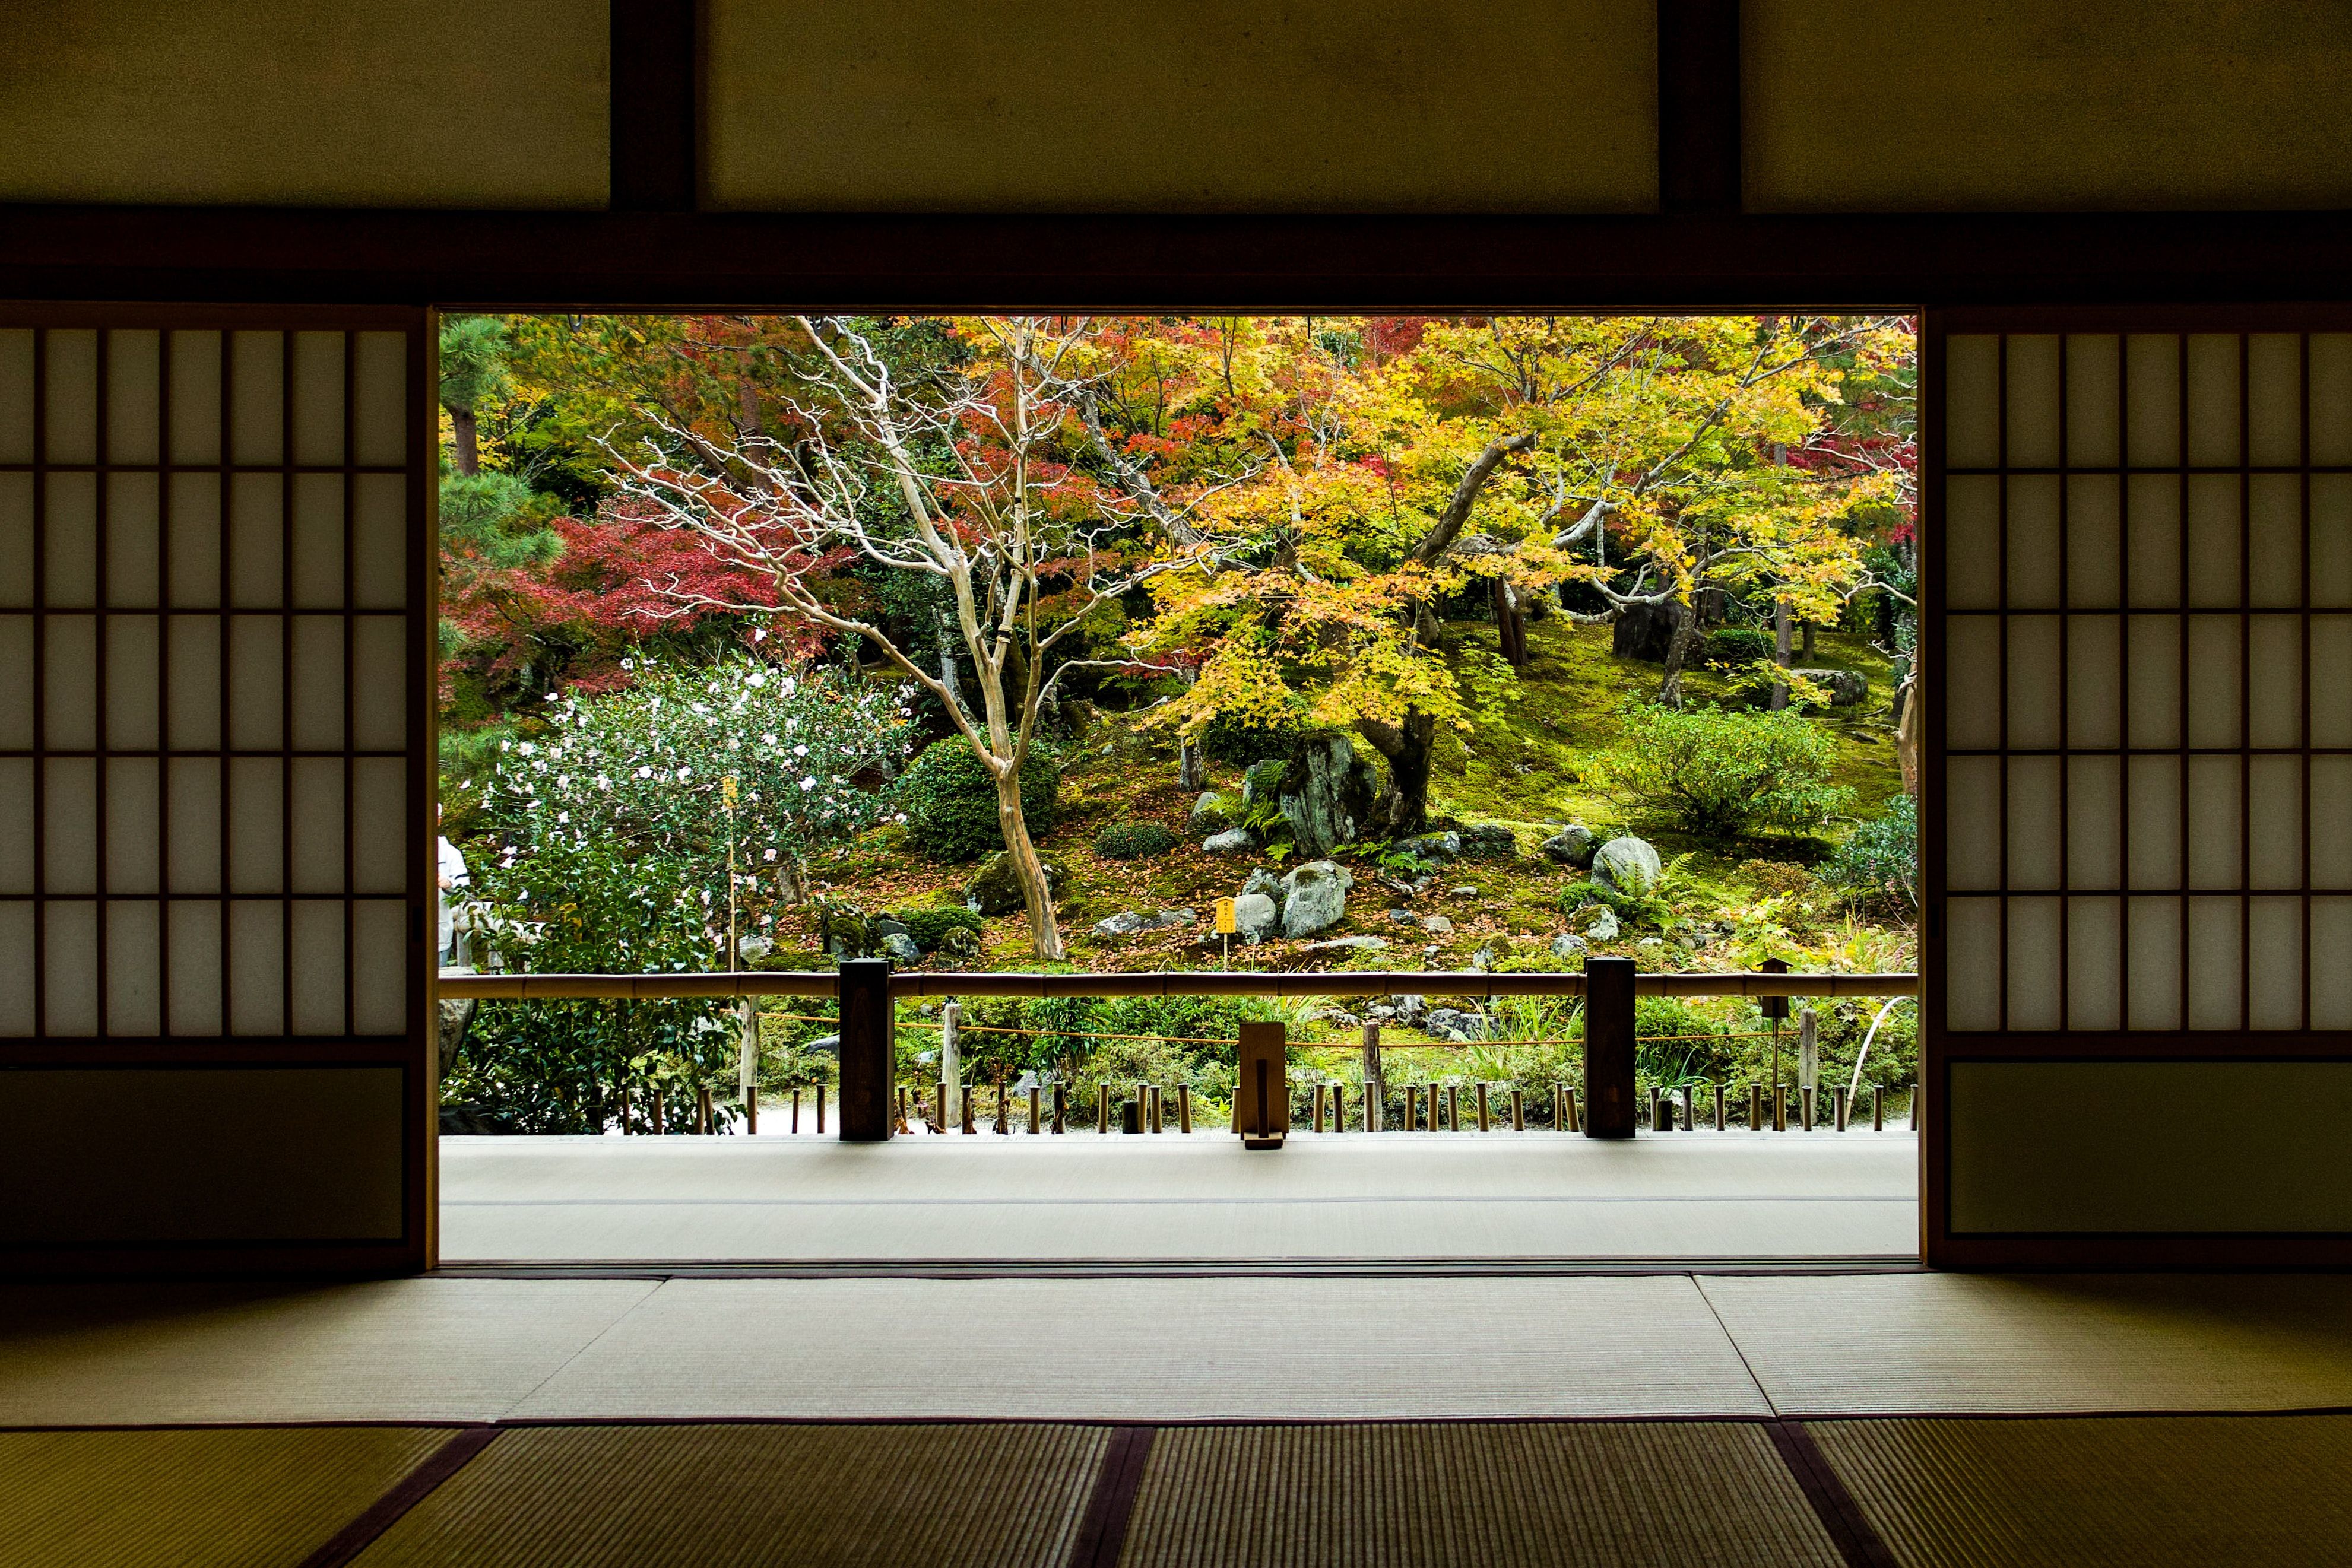 Nature through the window in Japan